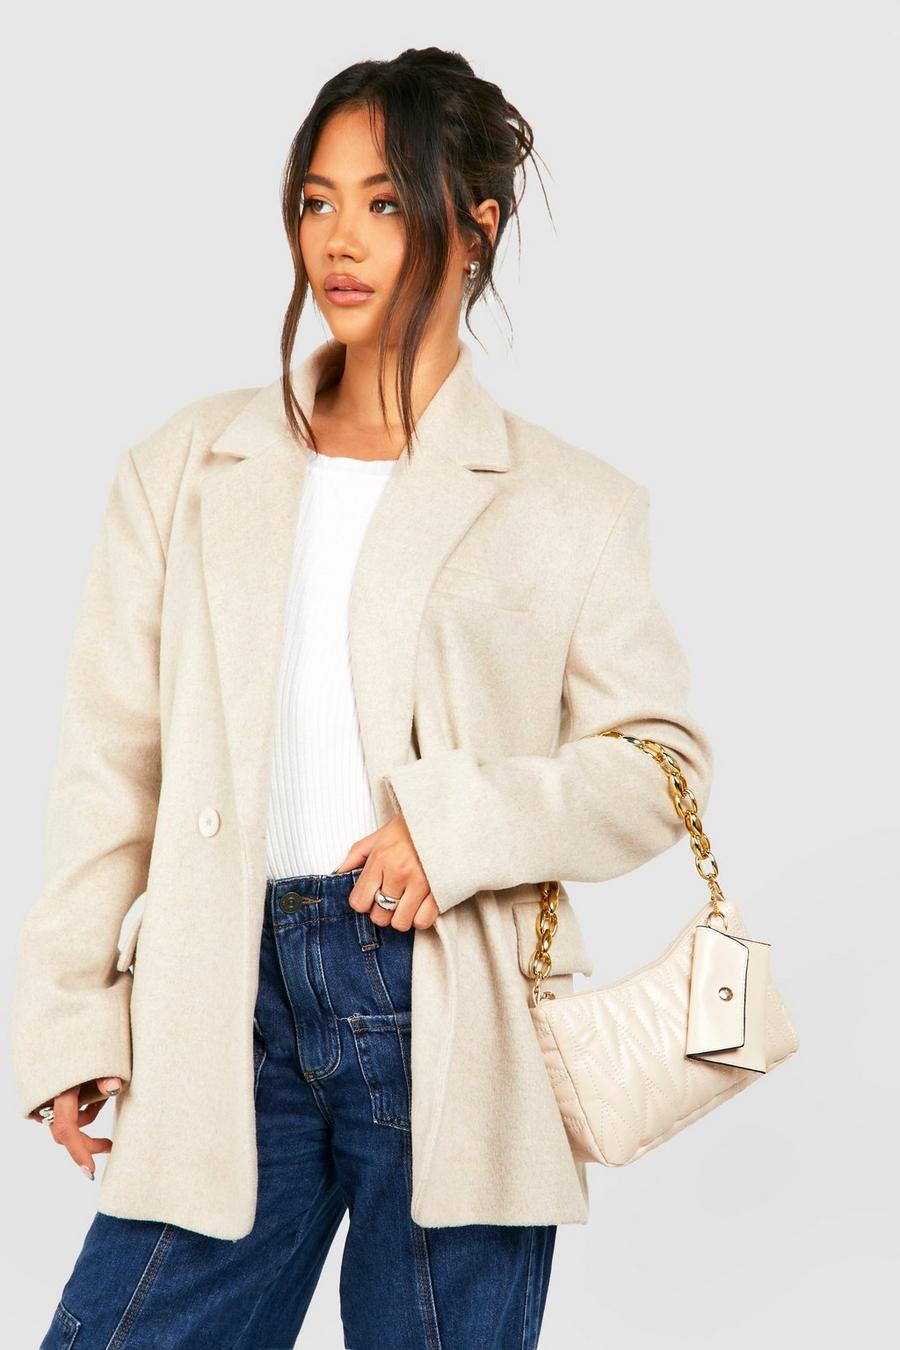 Cream Quilted Chain Shoulder Bag